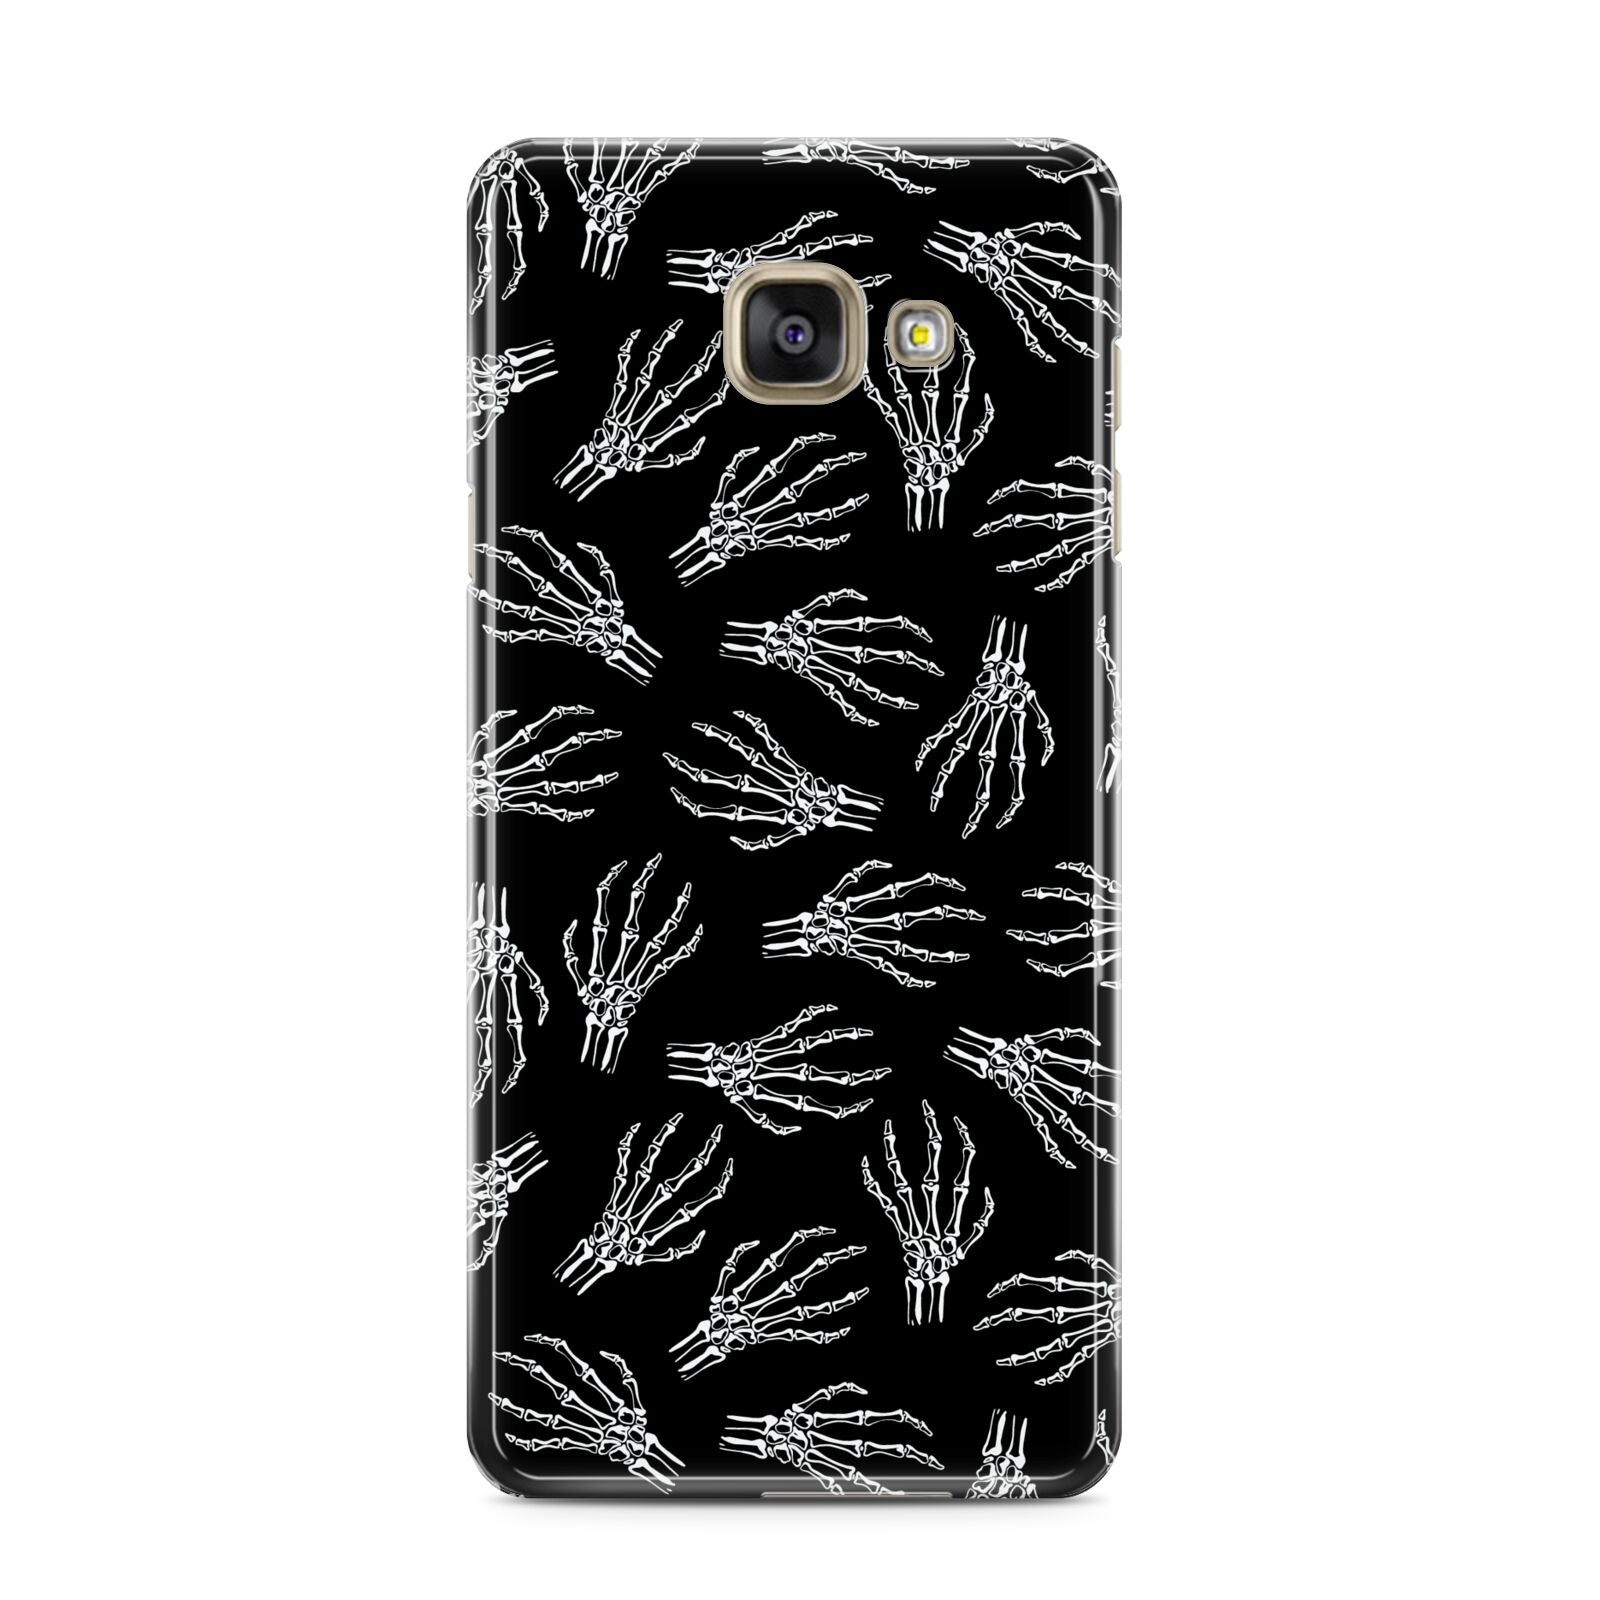 Skeleton Hands Samsung Galaxy A3 2016 Case on gold phone